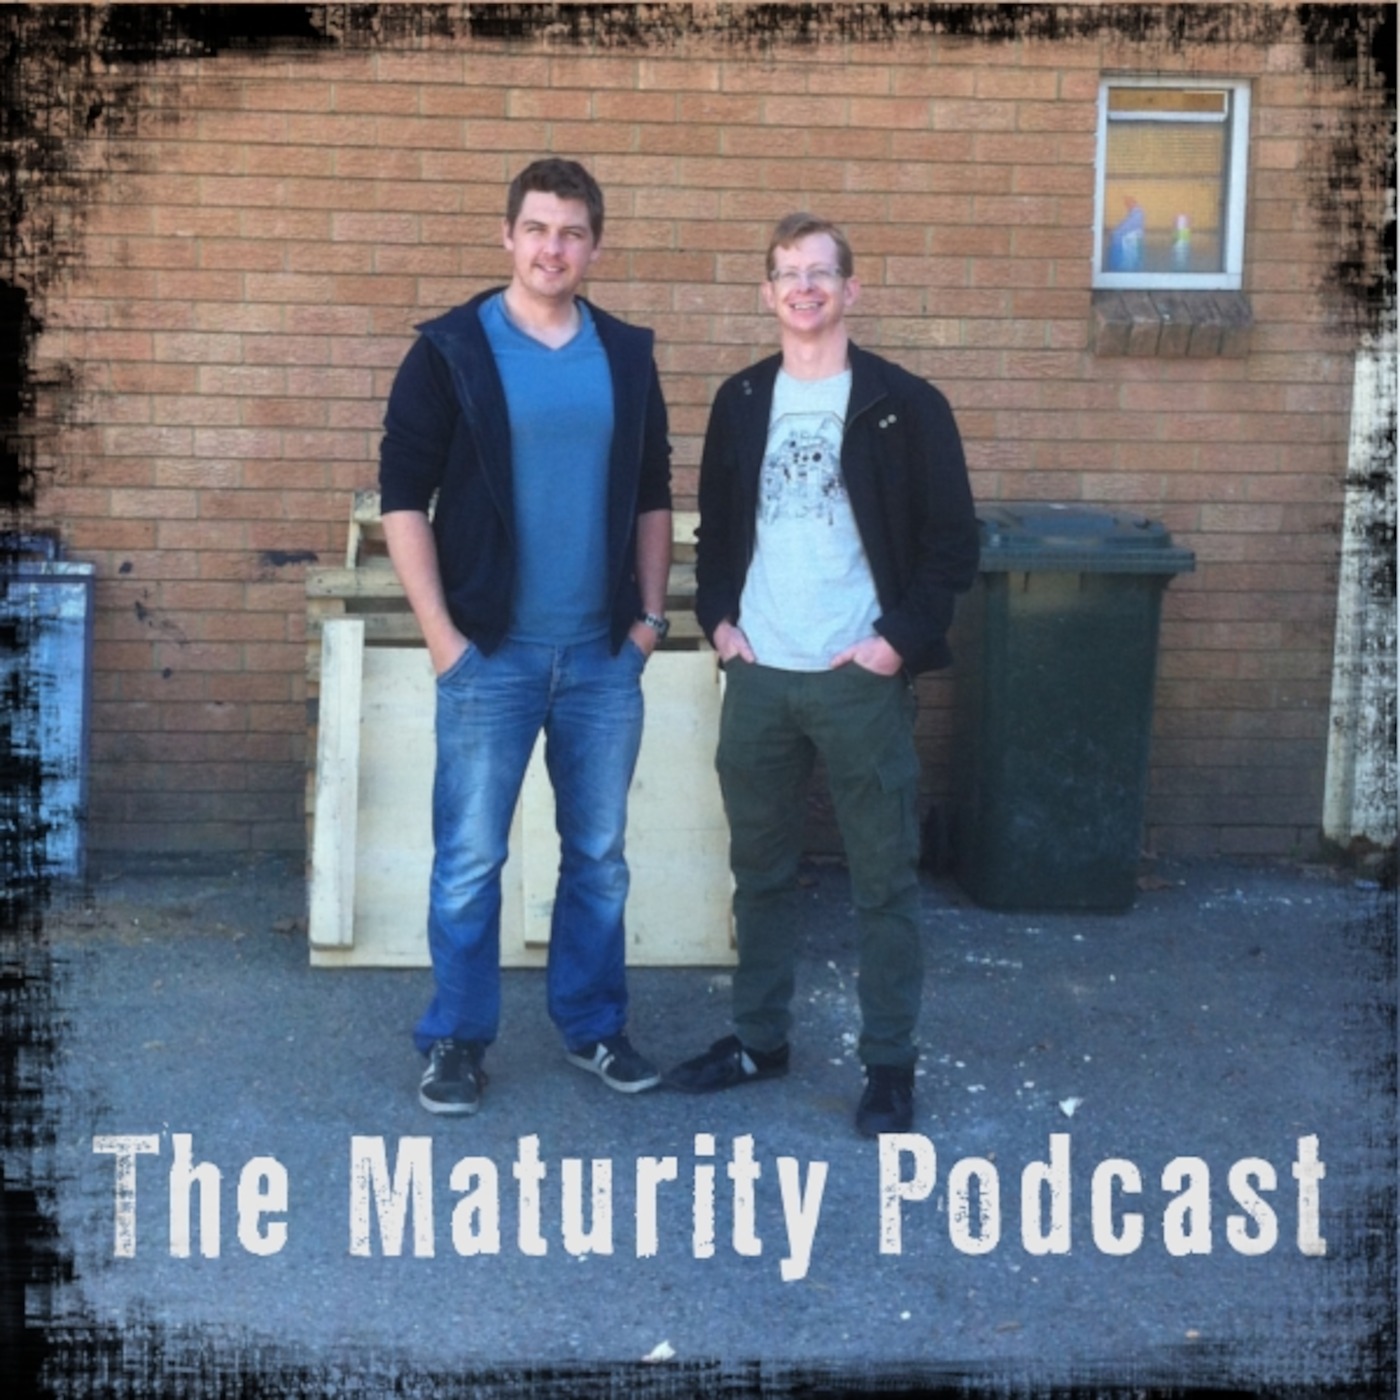 The Maturity Podcast